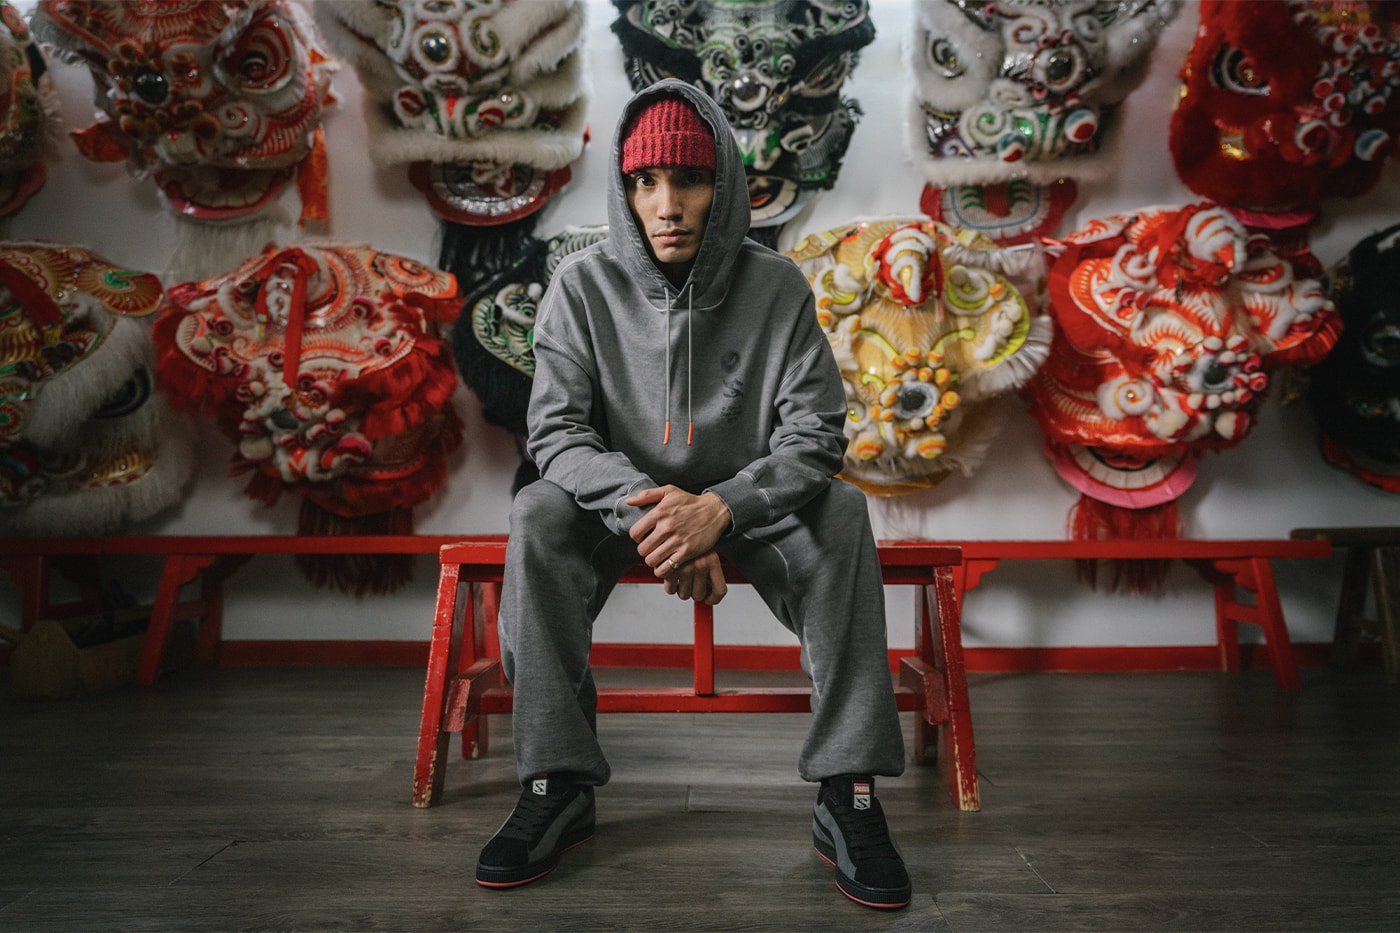 STAPLE and PUMA Join Forces for a Celebratory "Year of the Dragon" Collection collaboration lunar new year lion dance club new york city chinese fremasons athletic club cfmac sneakers granola alpine snow puma black suede sweatpants hoodie tshirt